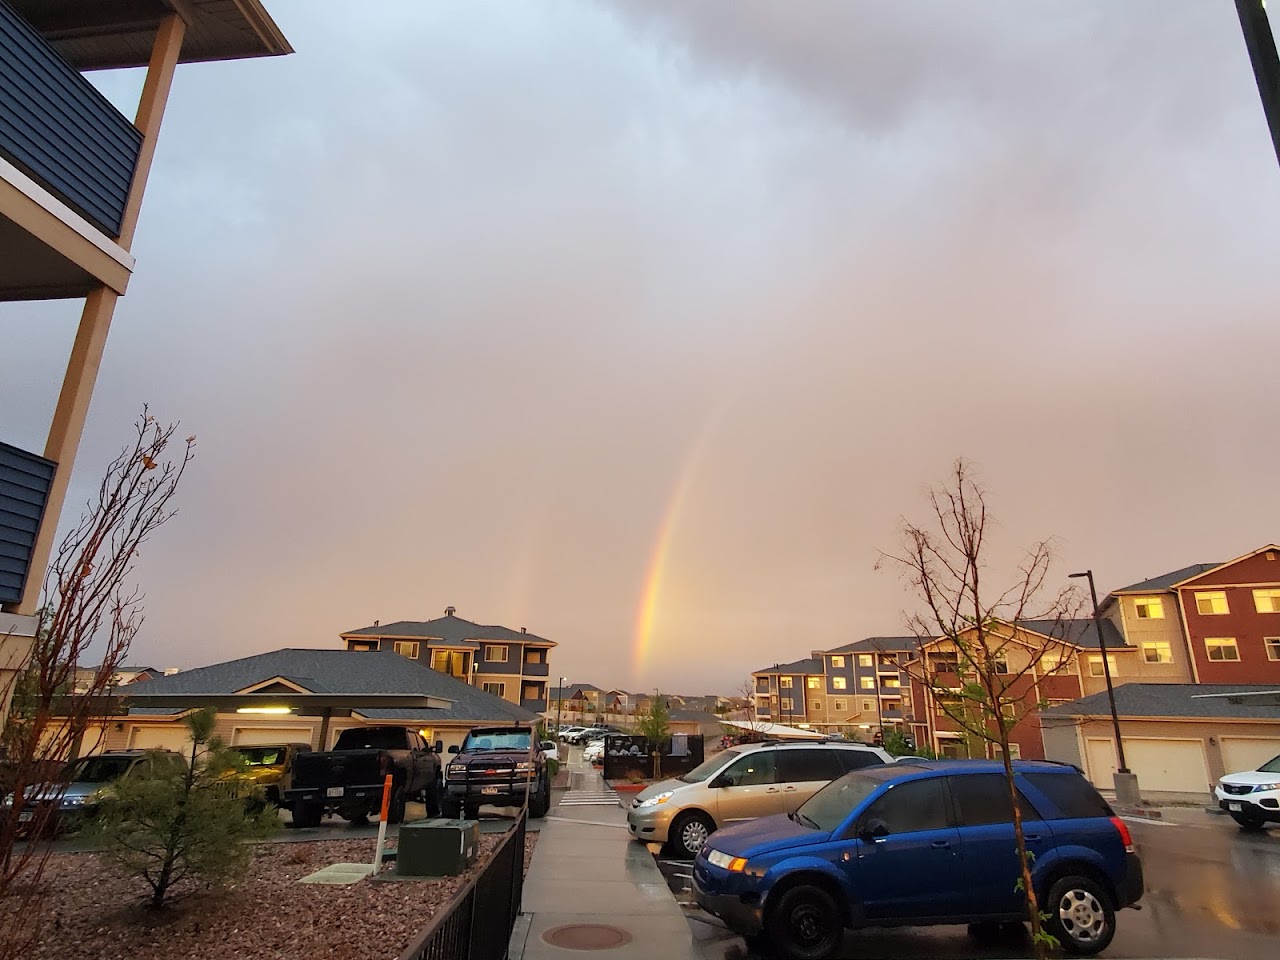 Photo of COPPER RANGE APARTMENTS. Affordable housing located at 7535 COPPER RANGE HEIGHTS COLORADO SPRINGS, CO 80903